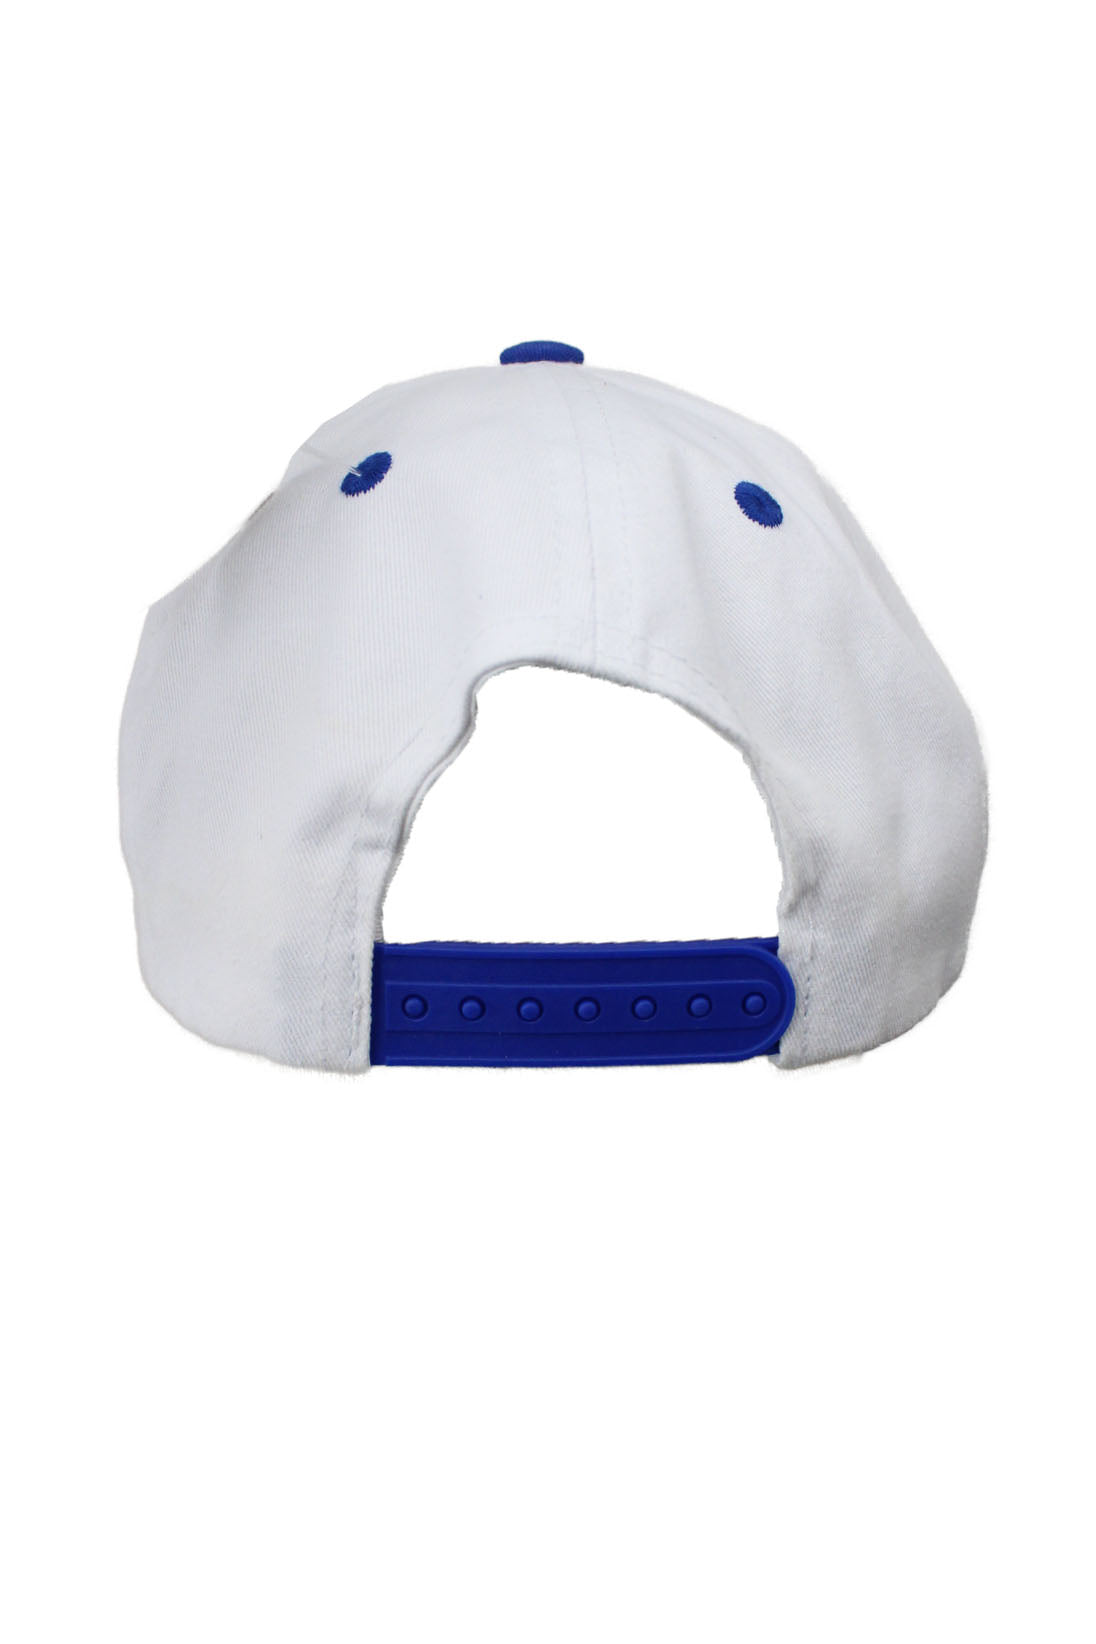 rear view with adjustable snapback closure.